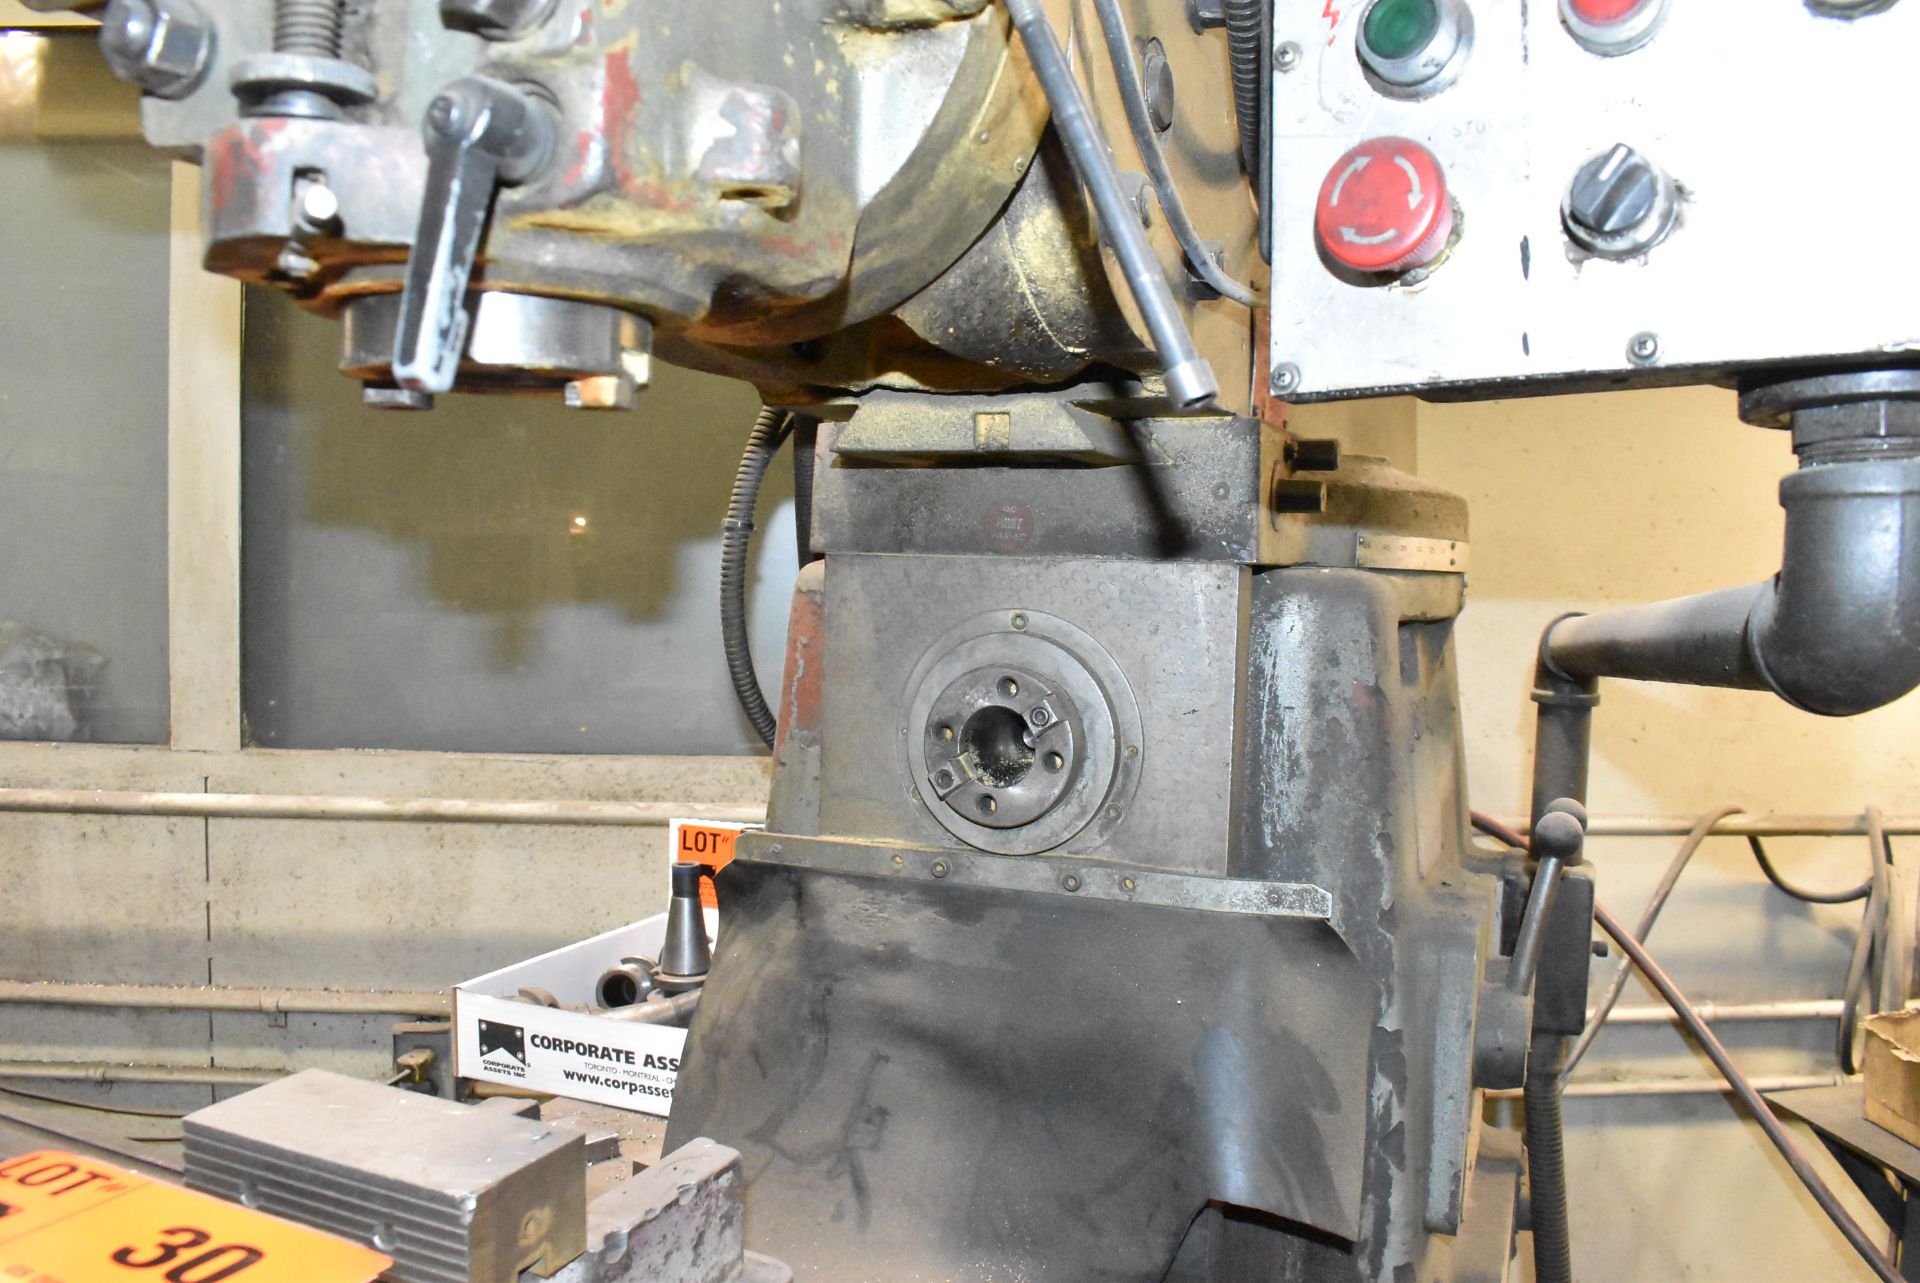 FIRST LC-20VHS UNIVERSAL MILLING MACHINE WITH 50"X10" TABLE, VERTICAL SPINDLE SPEEDS TO 4500 RPM, - Image 4 of 8